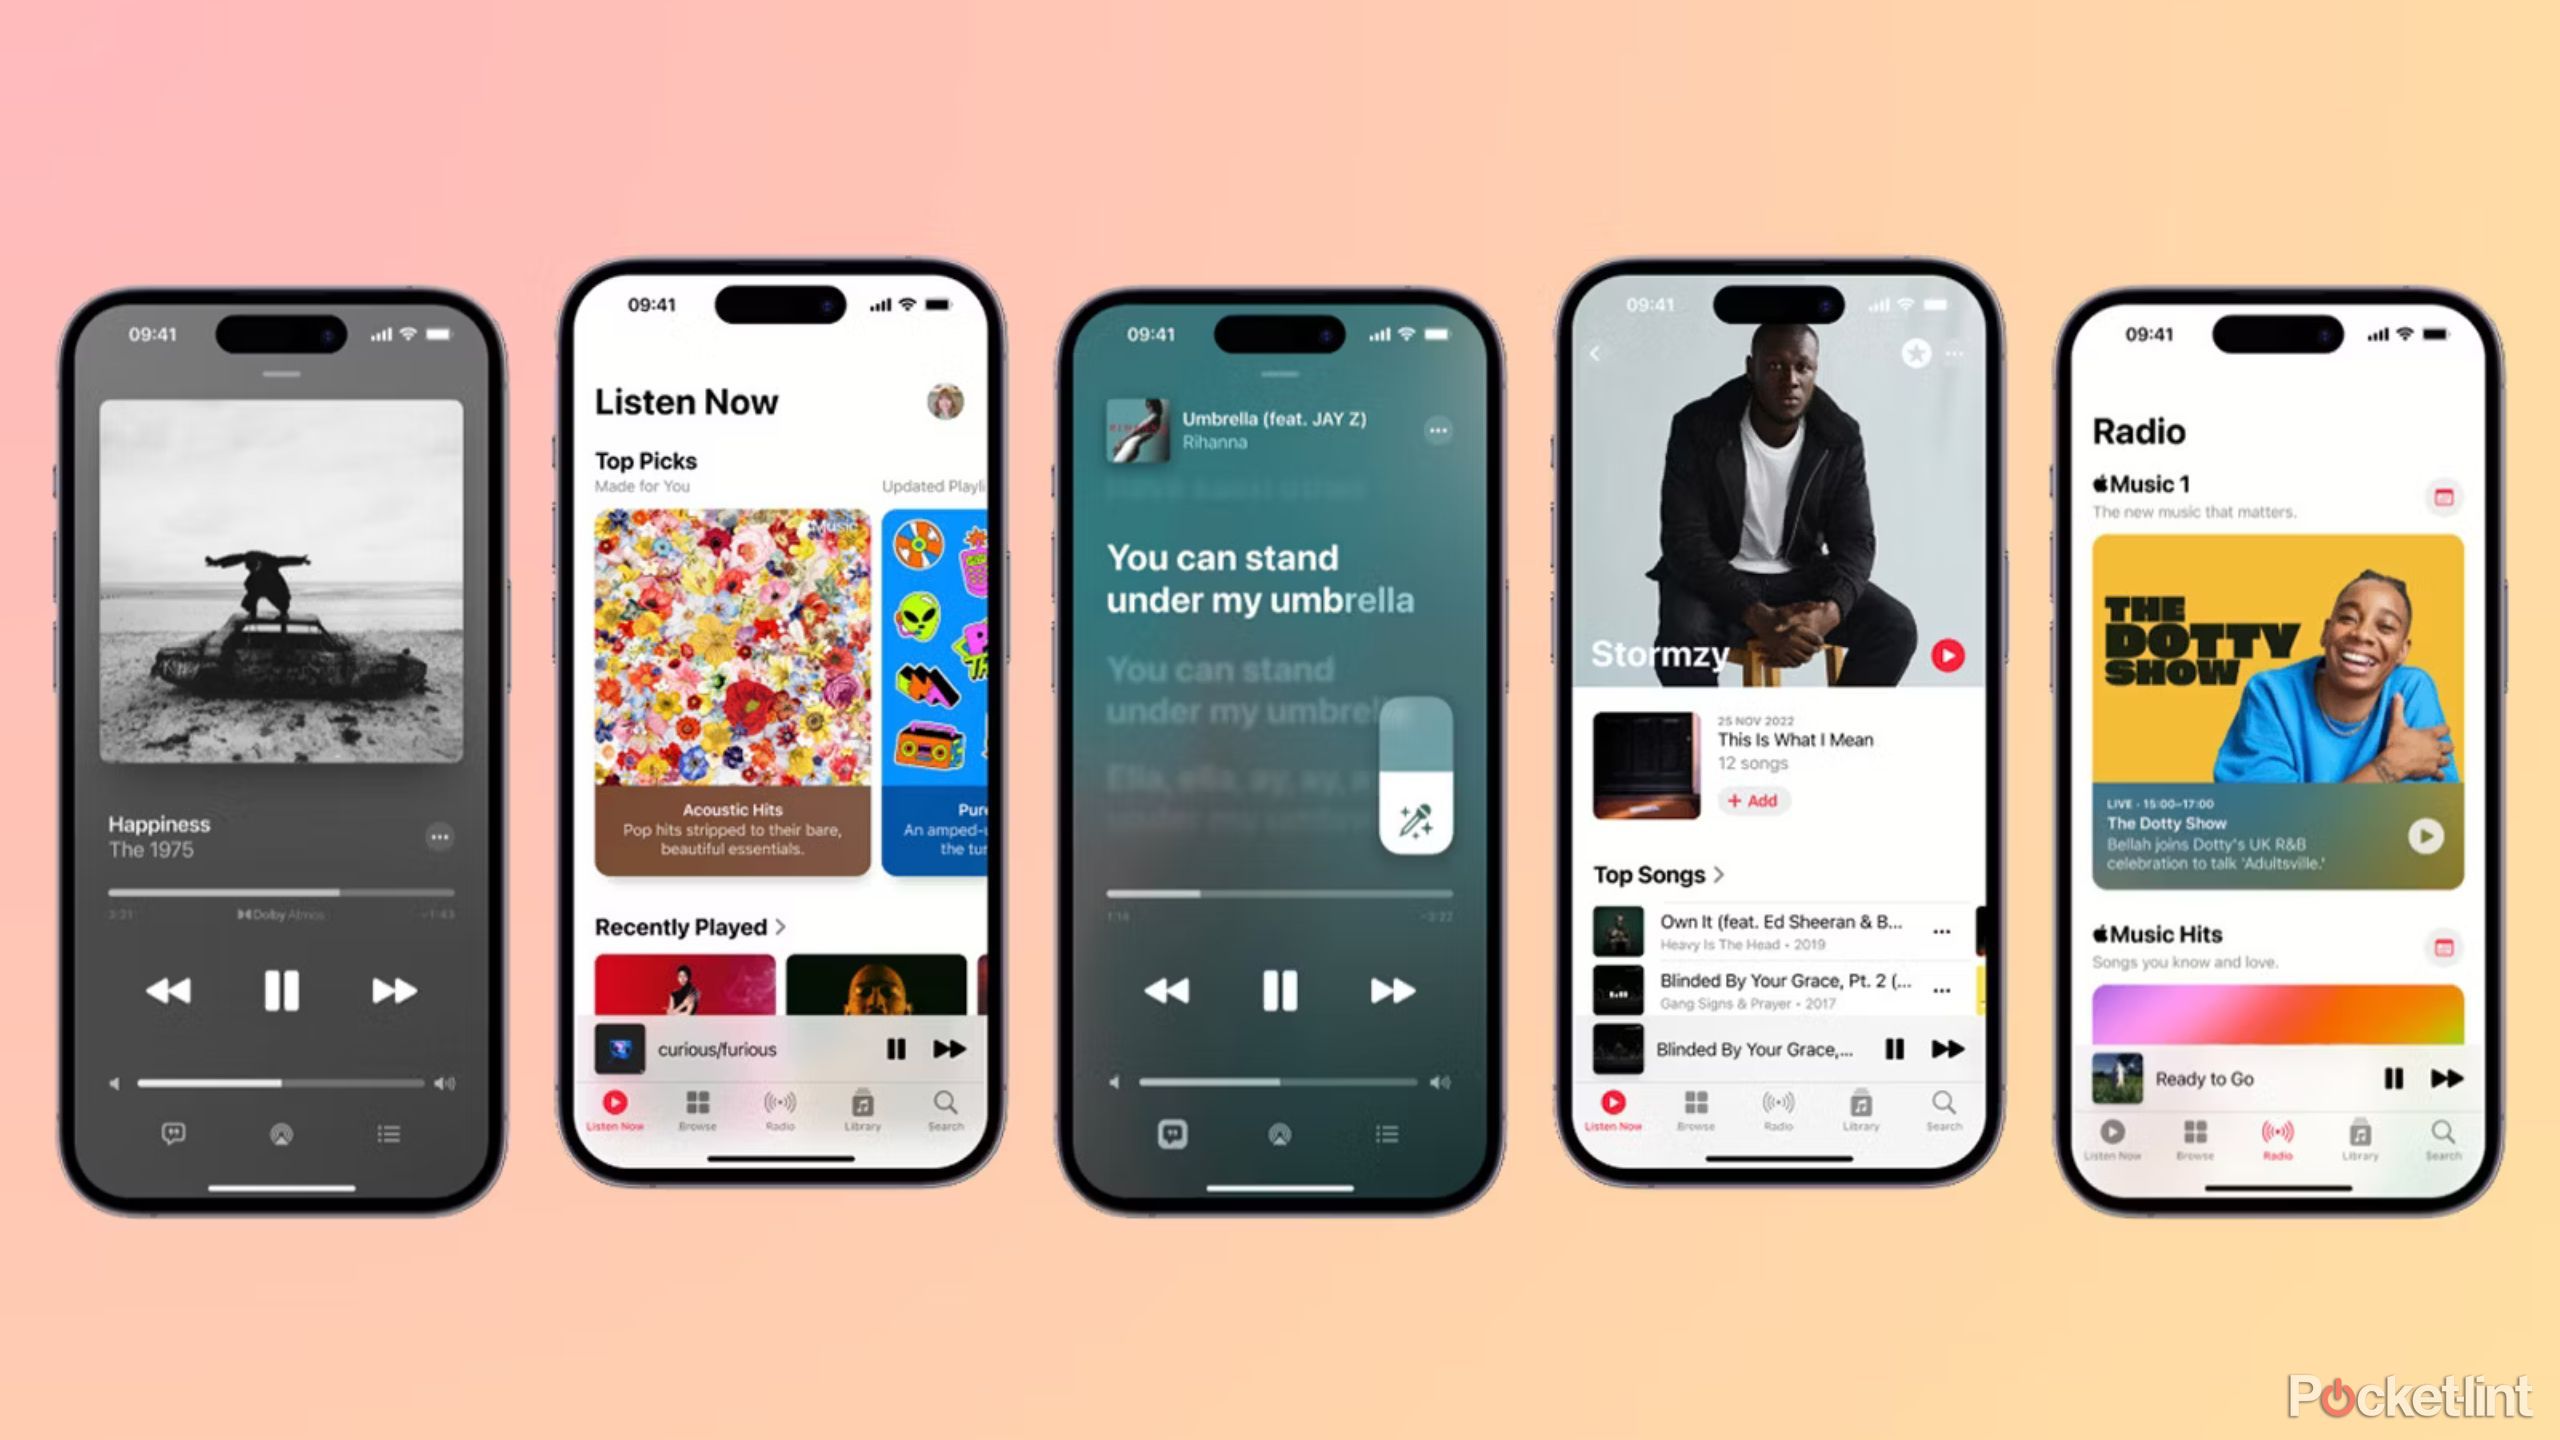 Screenshots from Apple Music on iPhone.